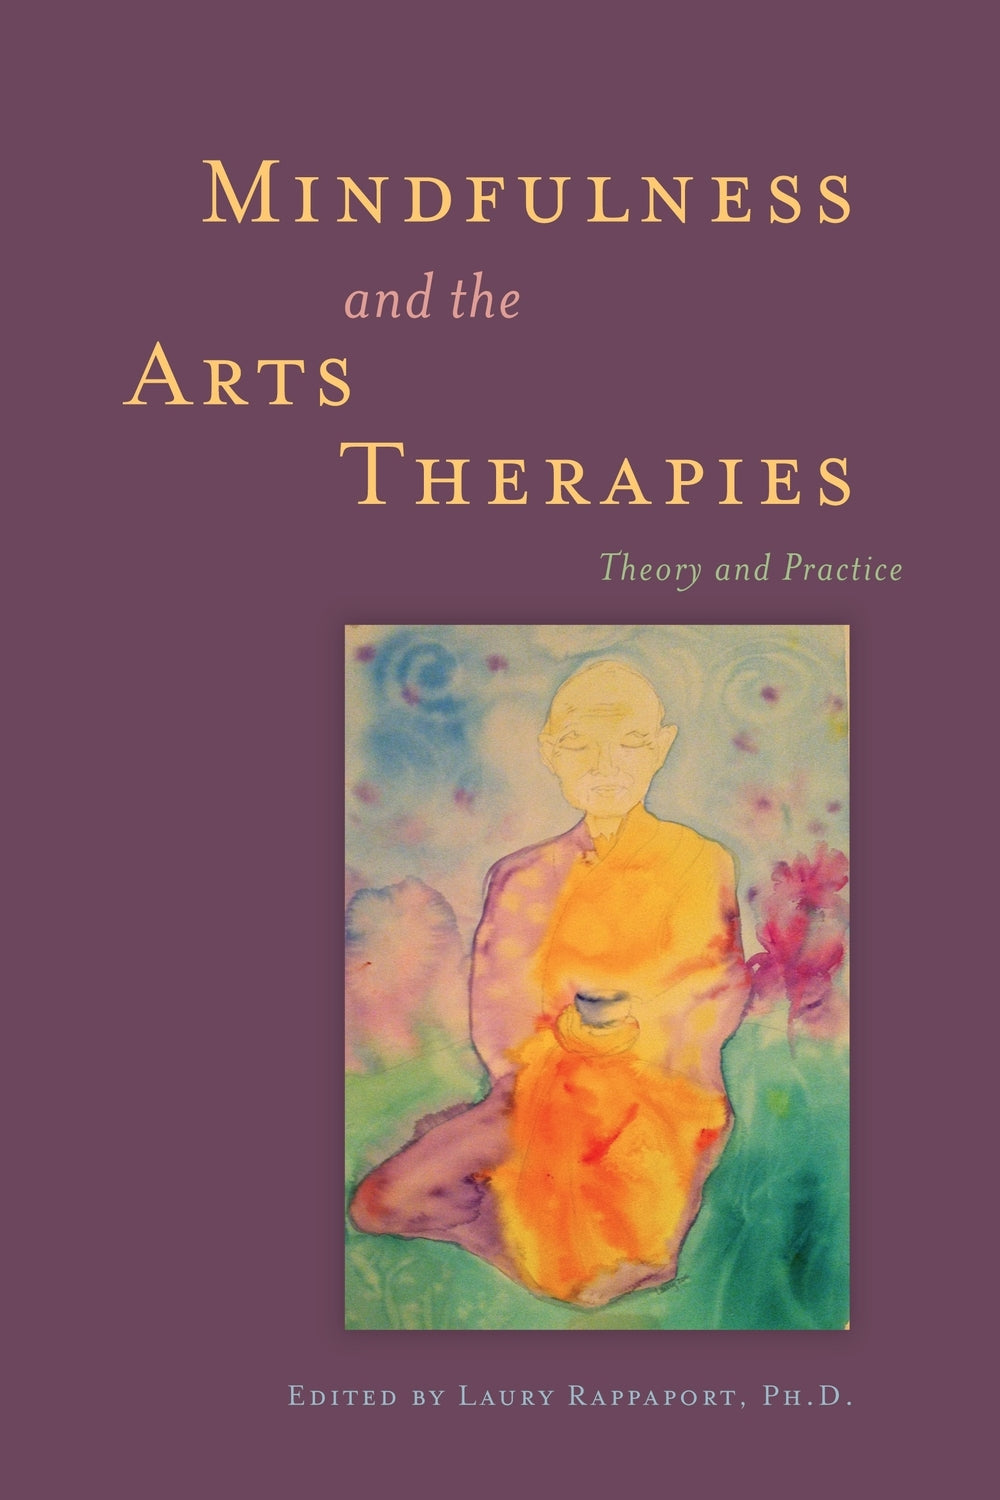 Mindfulness and the Arts Therapies by Laury Rappaport, No Author Listed